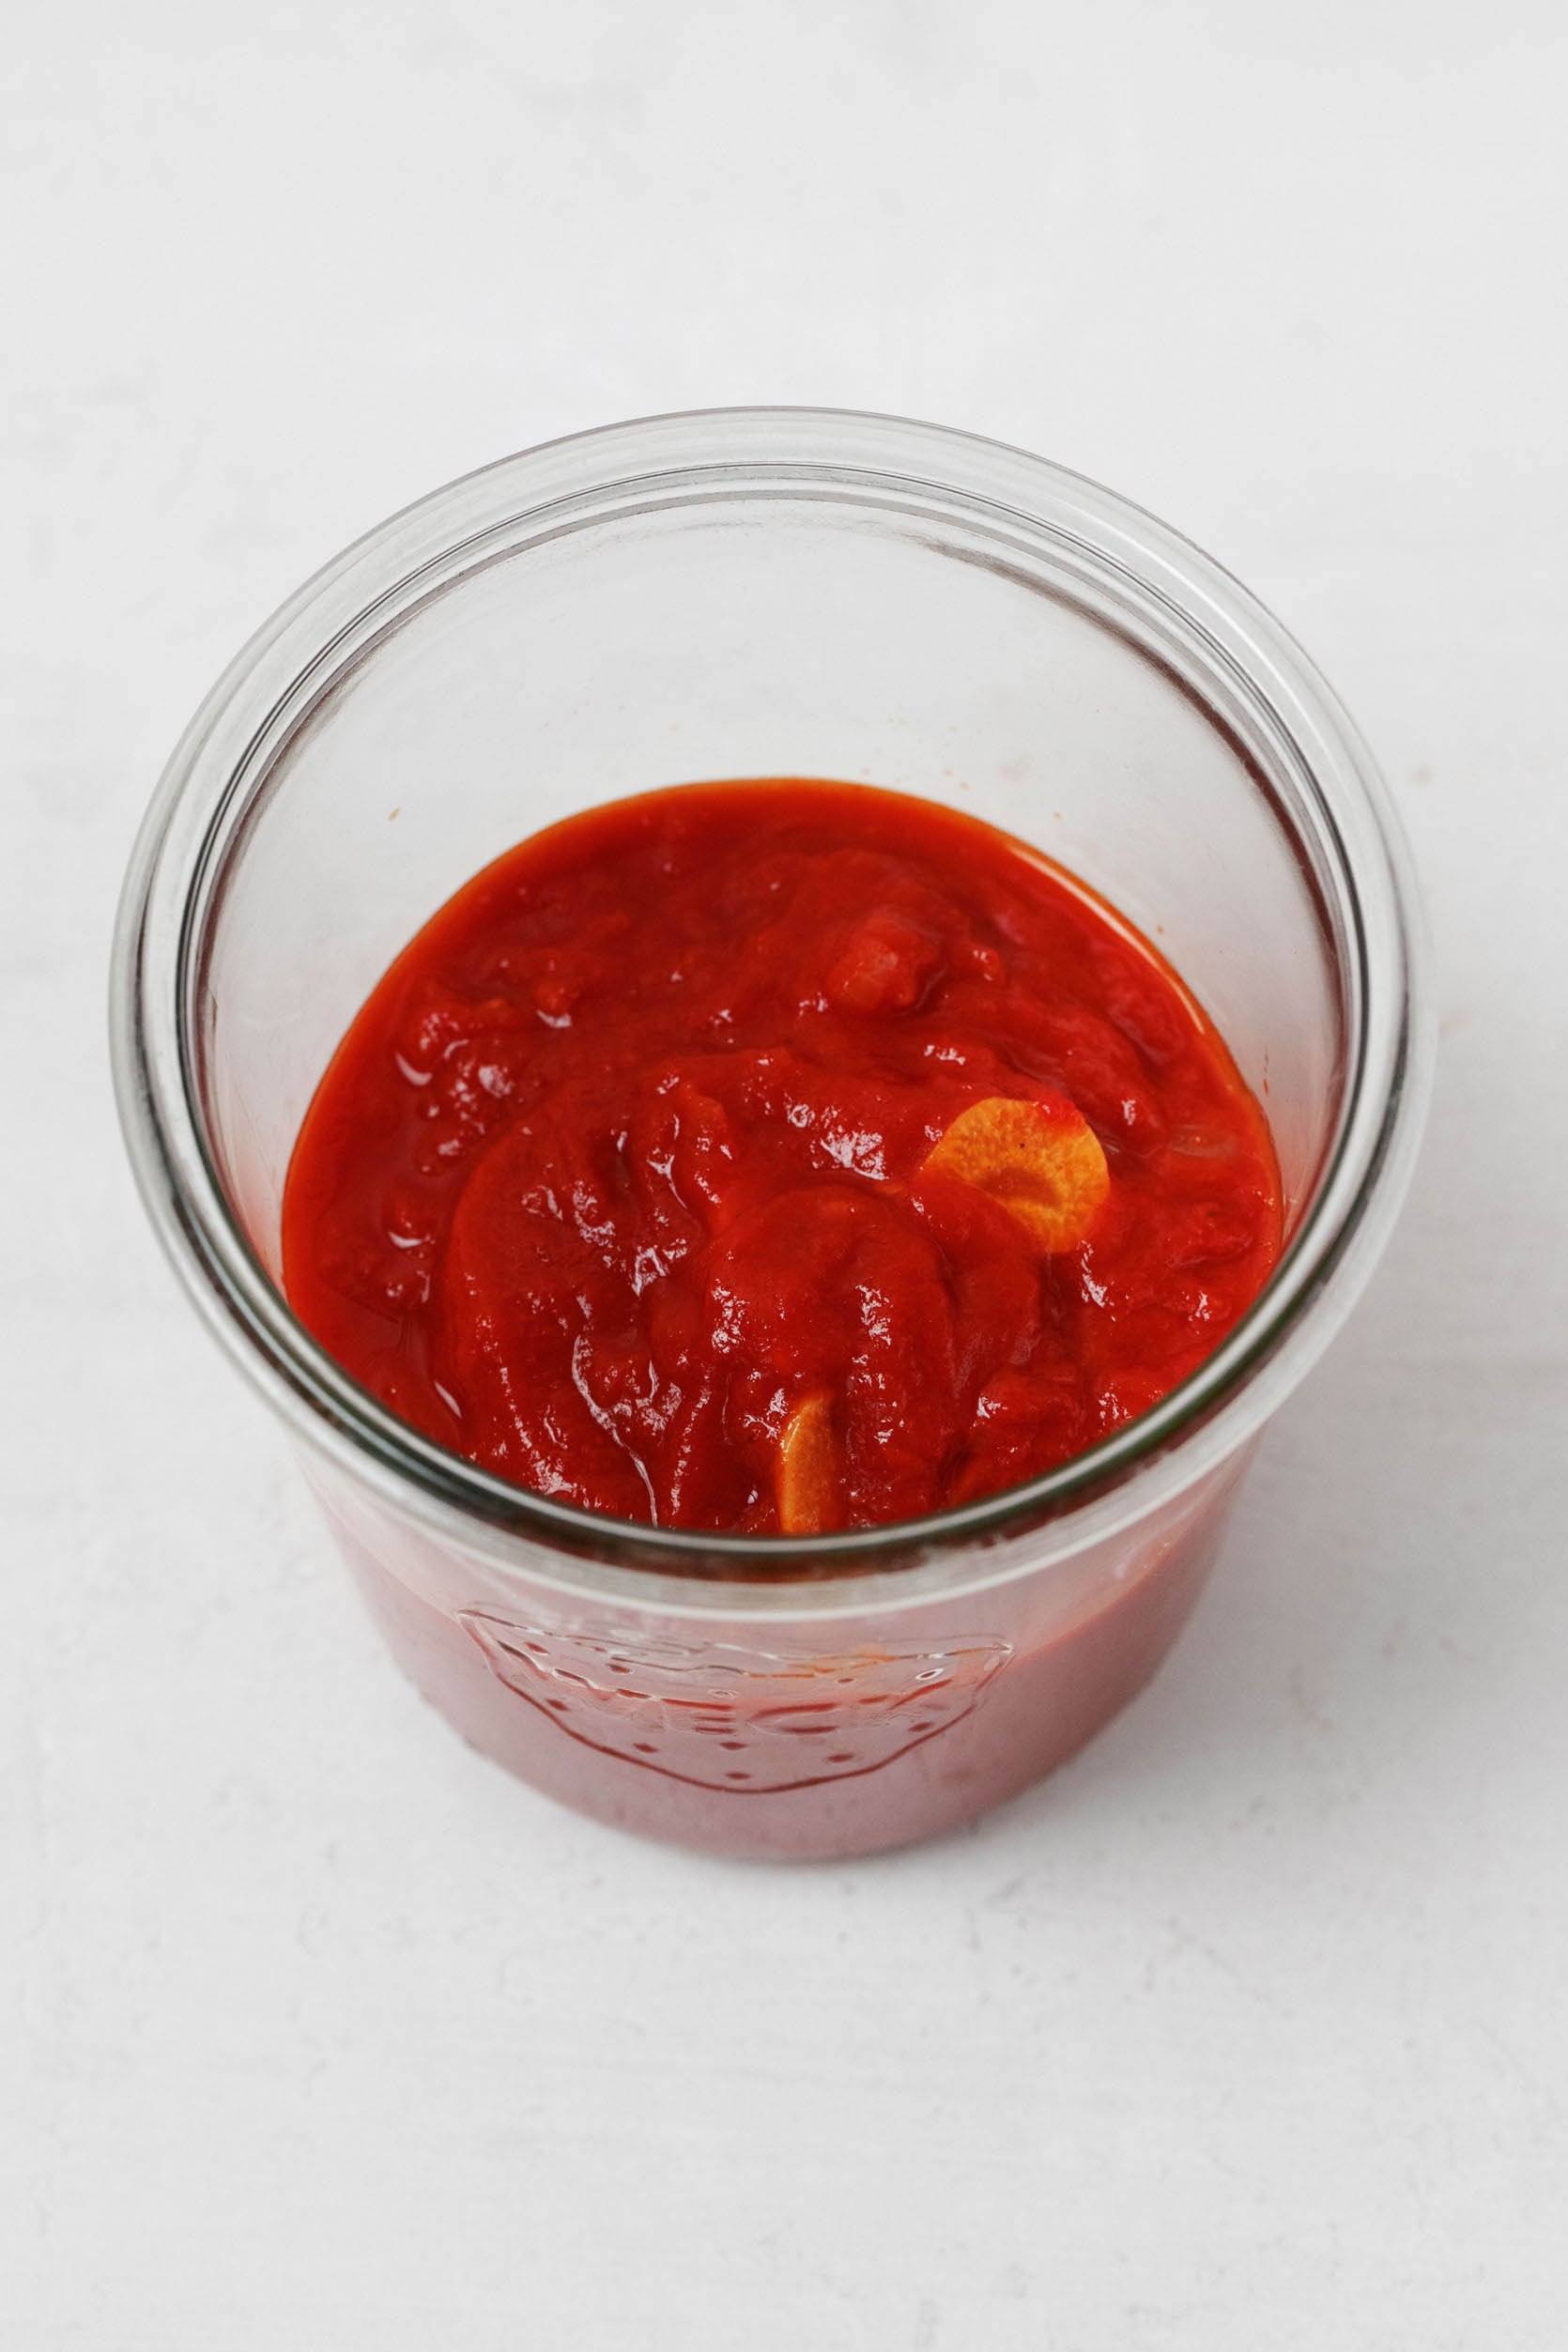 A Weck mason jar holds a red pasta sauce, which is studded with garlic.